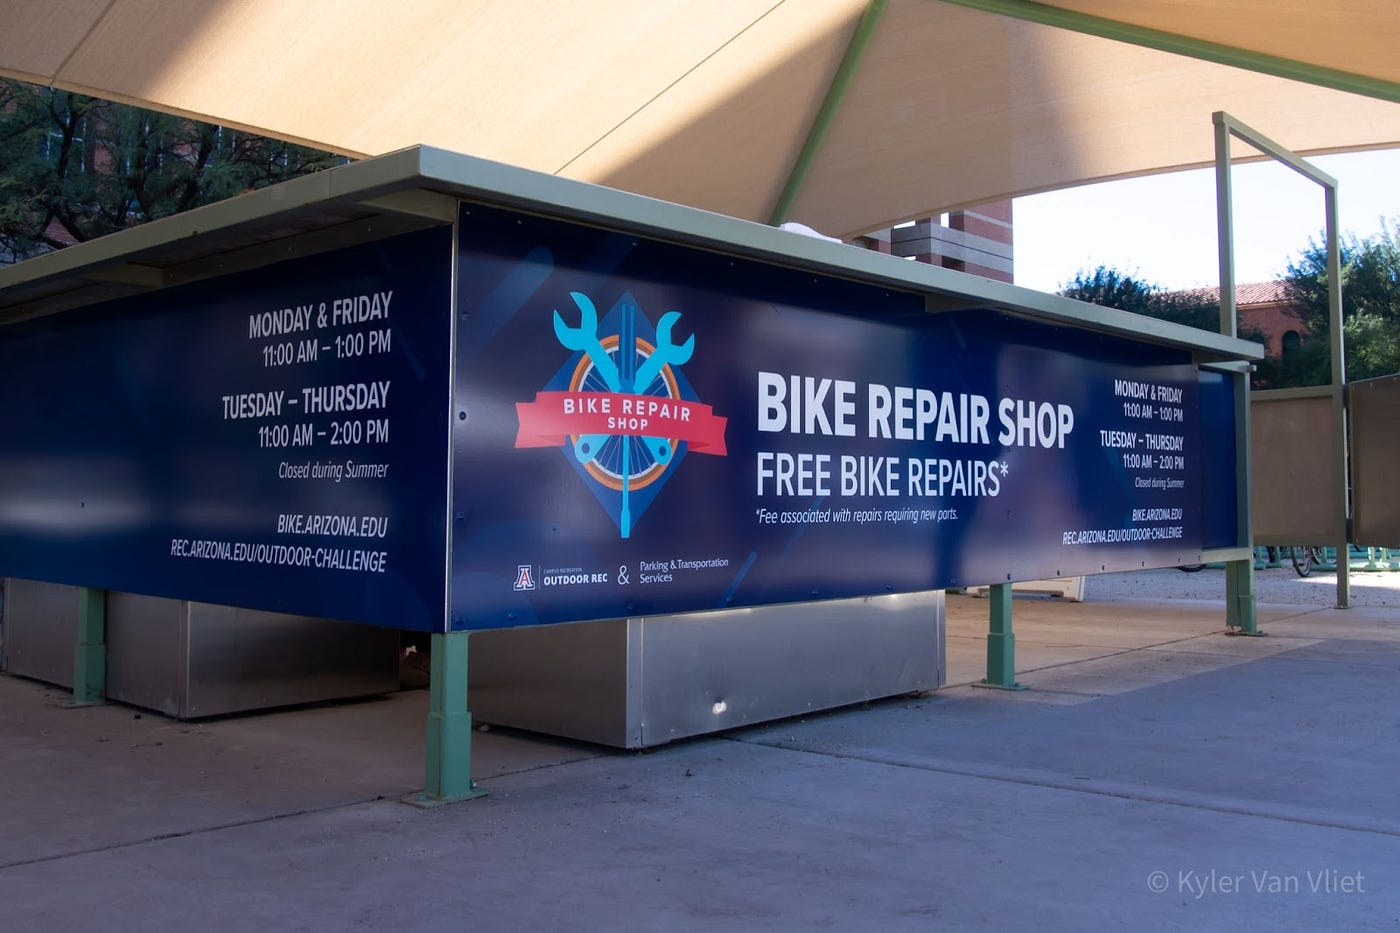 The Bike Repair Shop is located at the UA mall in front of the Koffler building. There is a fee associated with repairs that require any new parts. (Photo by Kyler Van Vliet)